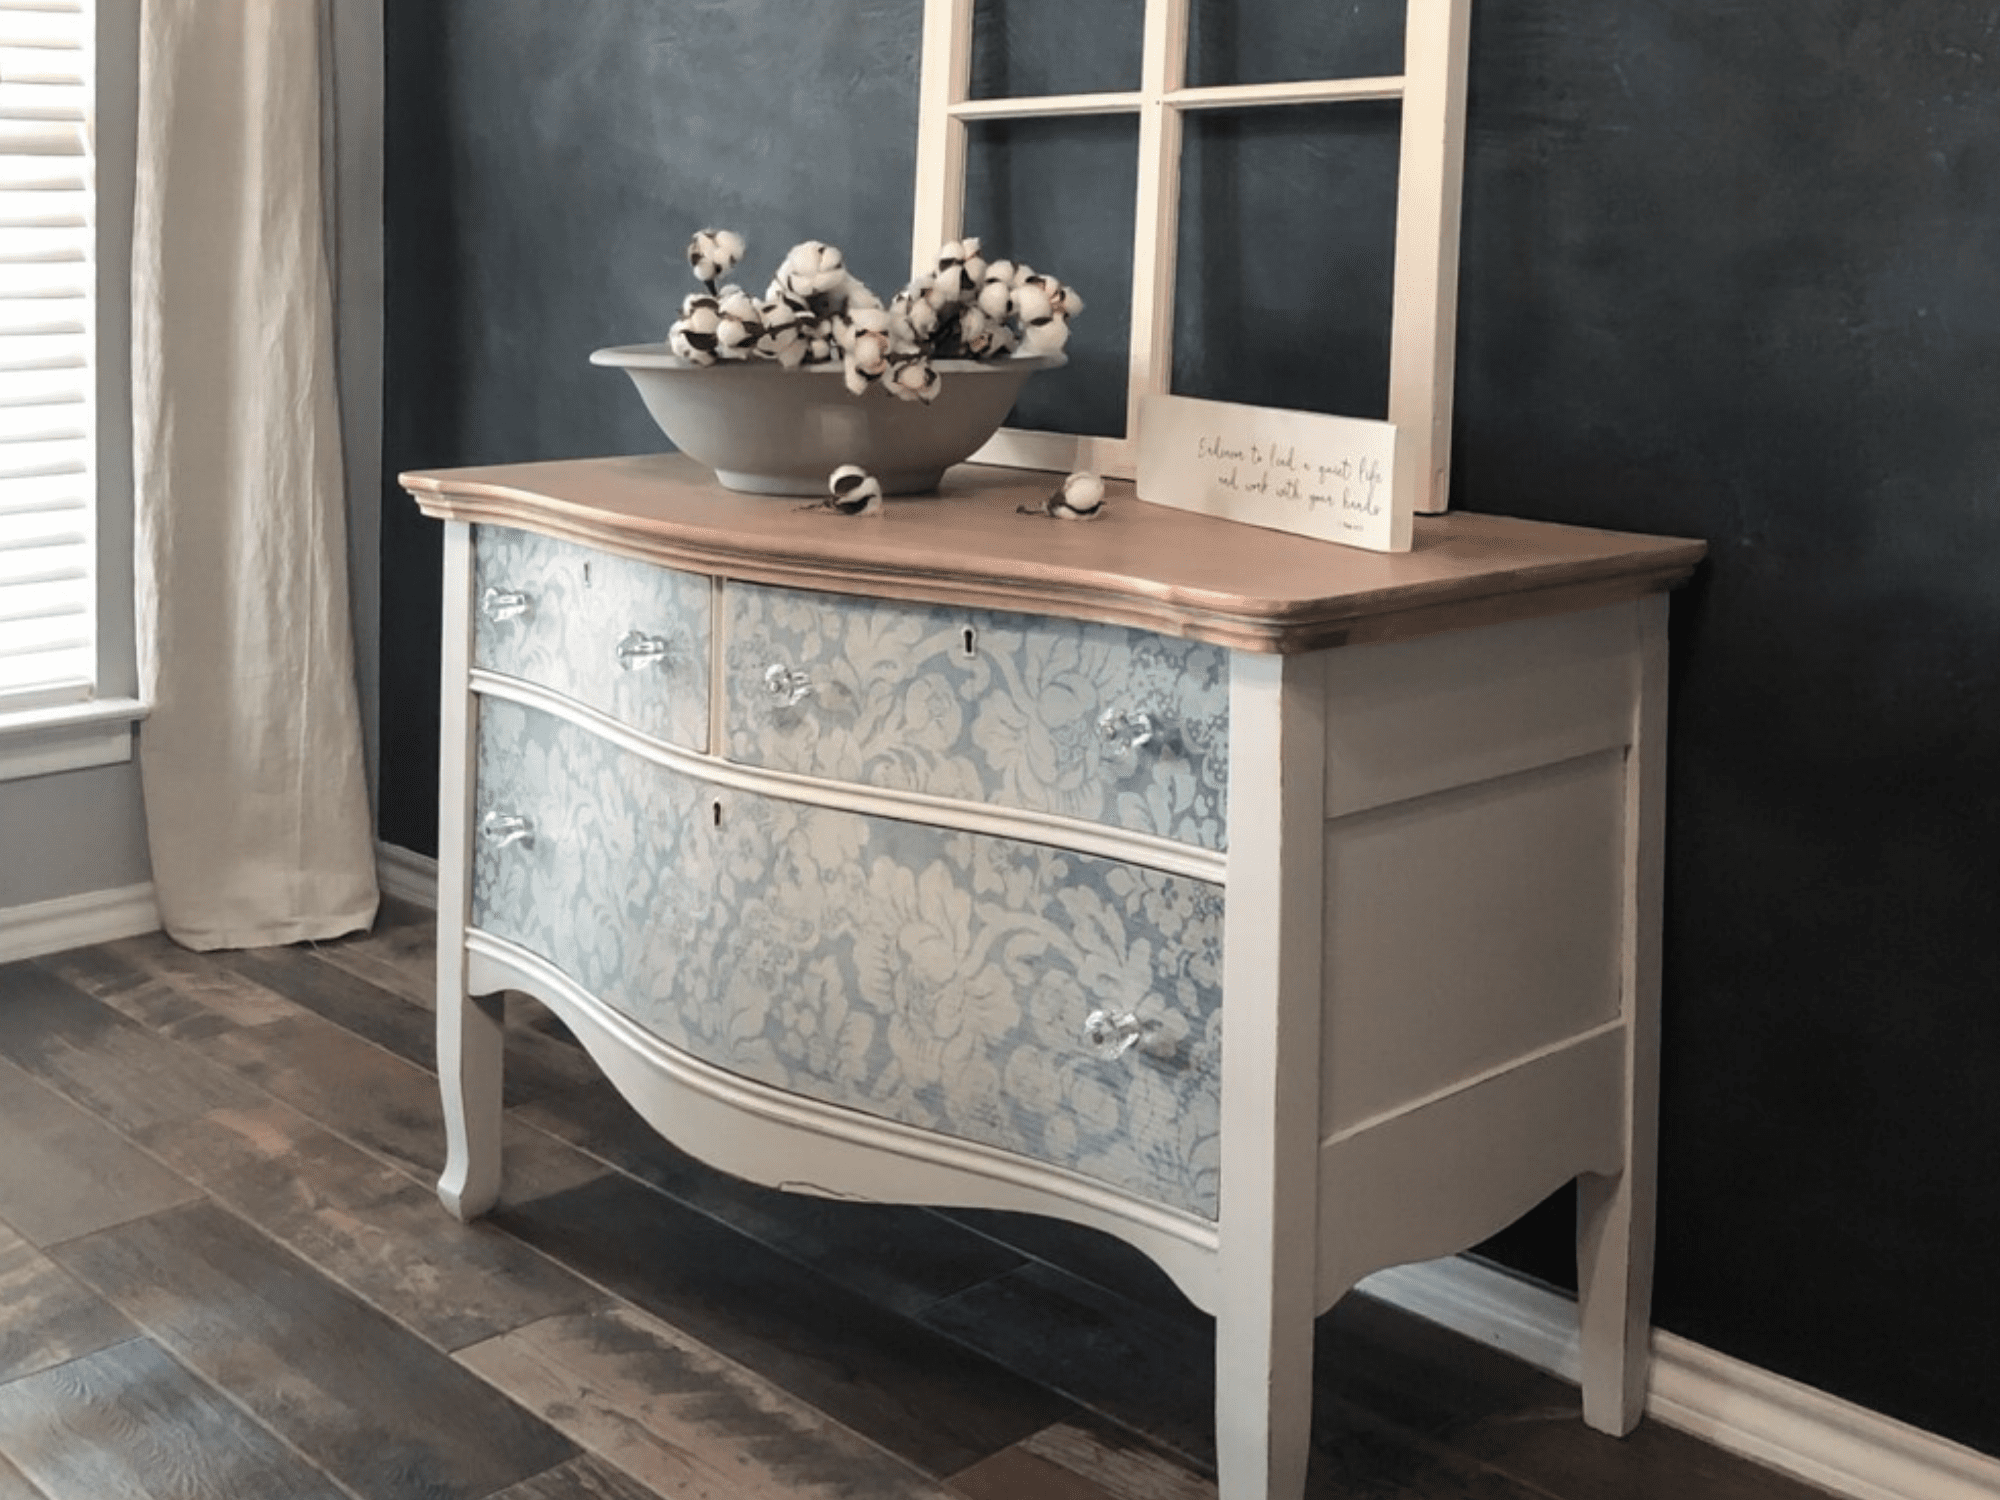 How to Apply Decoupage on Wood Furniture